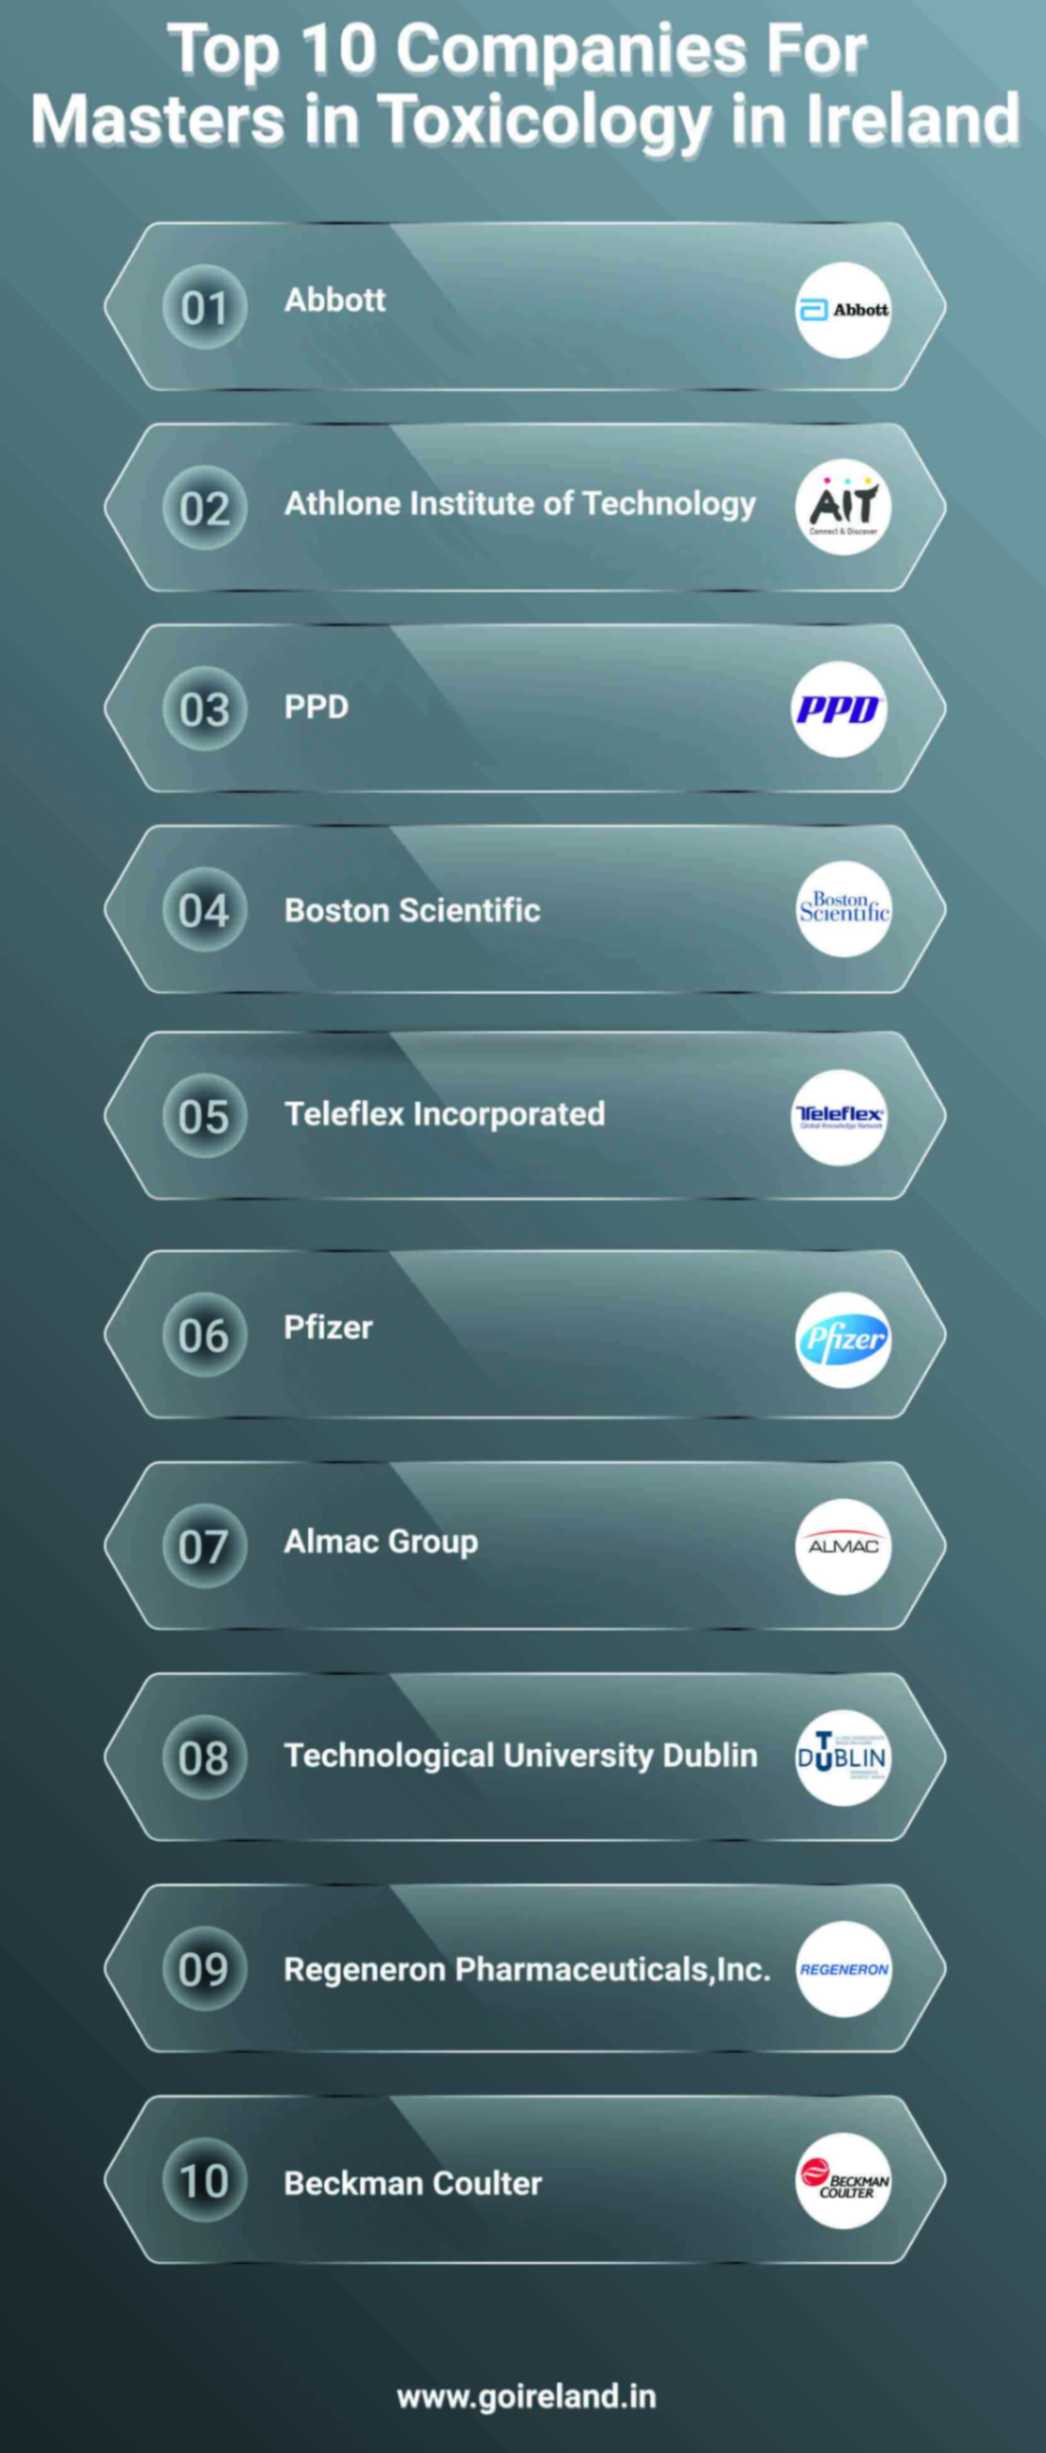 Top 10 Companies for Masters in Toxicology in Ireland